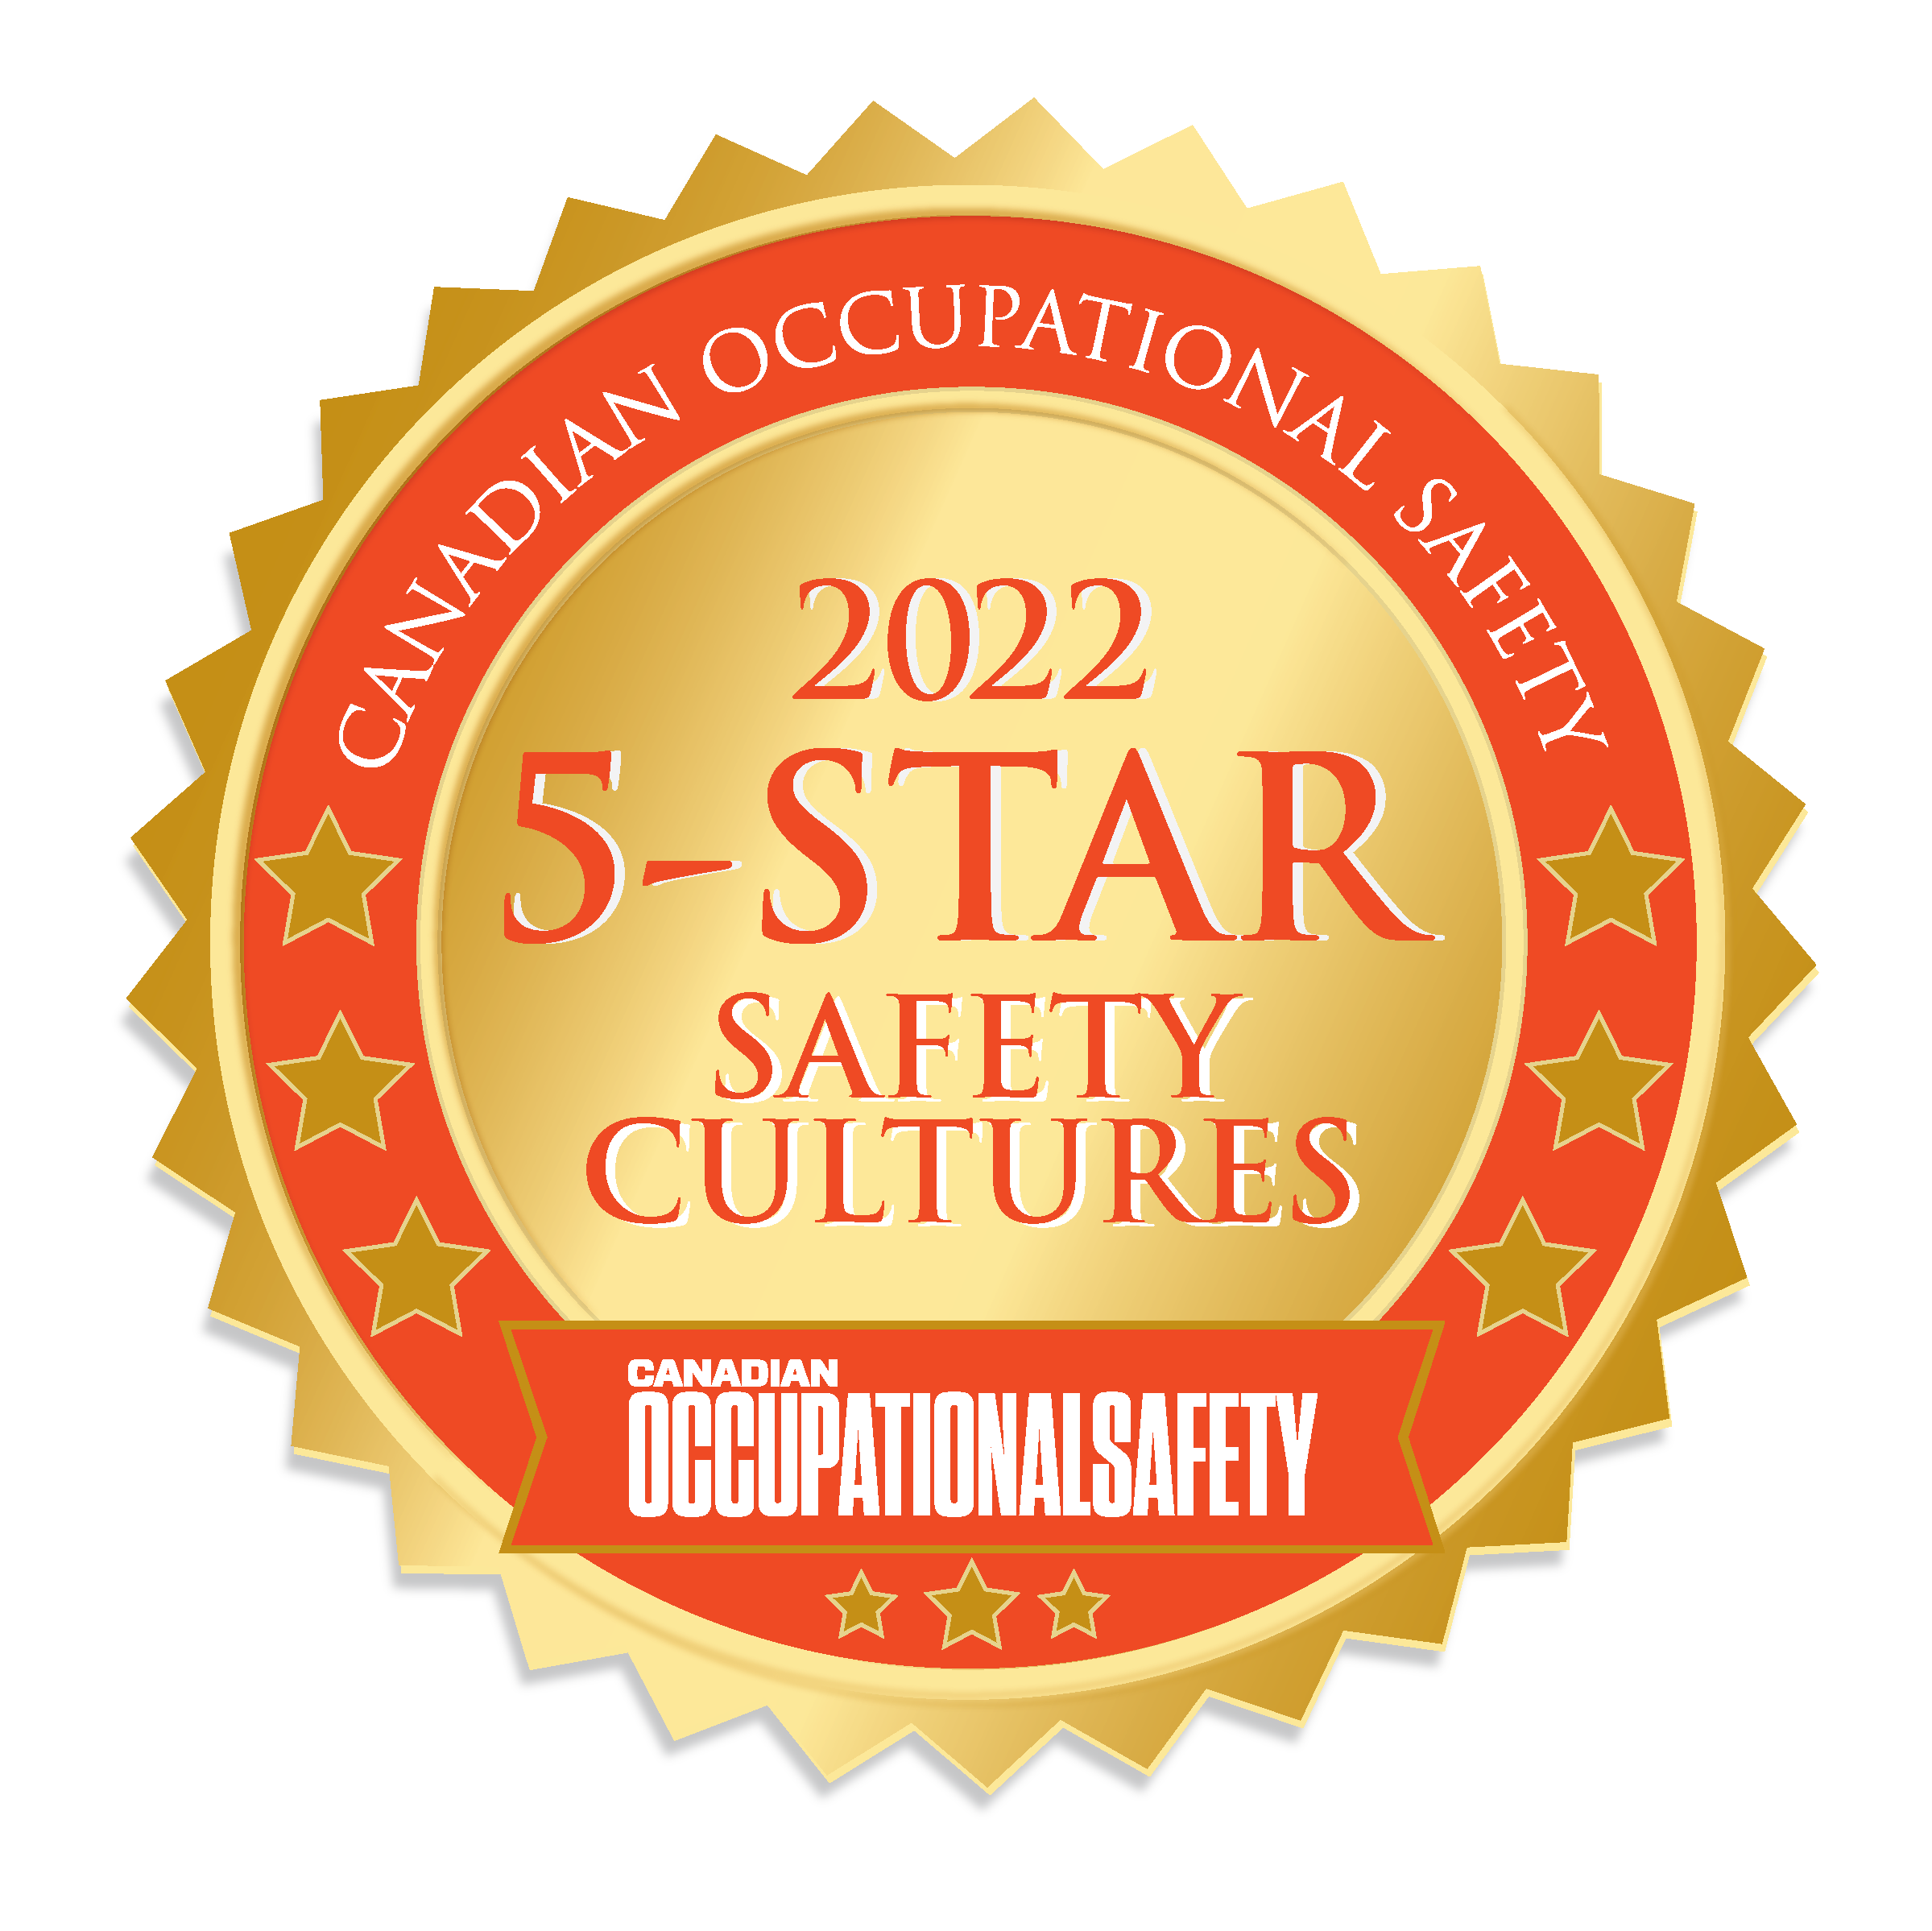 Image shows Canadian Occupational Safety magazine 2022 5-star Safety Award